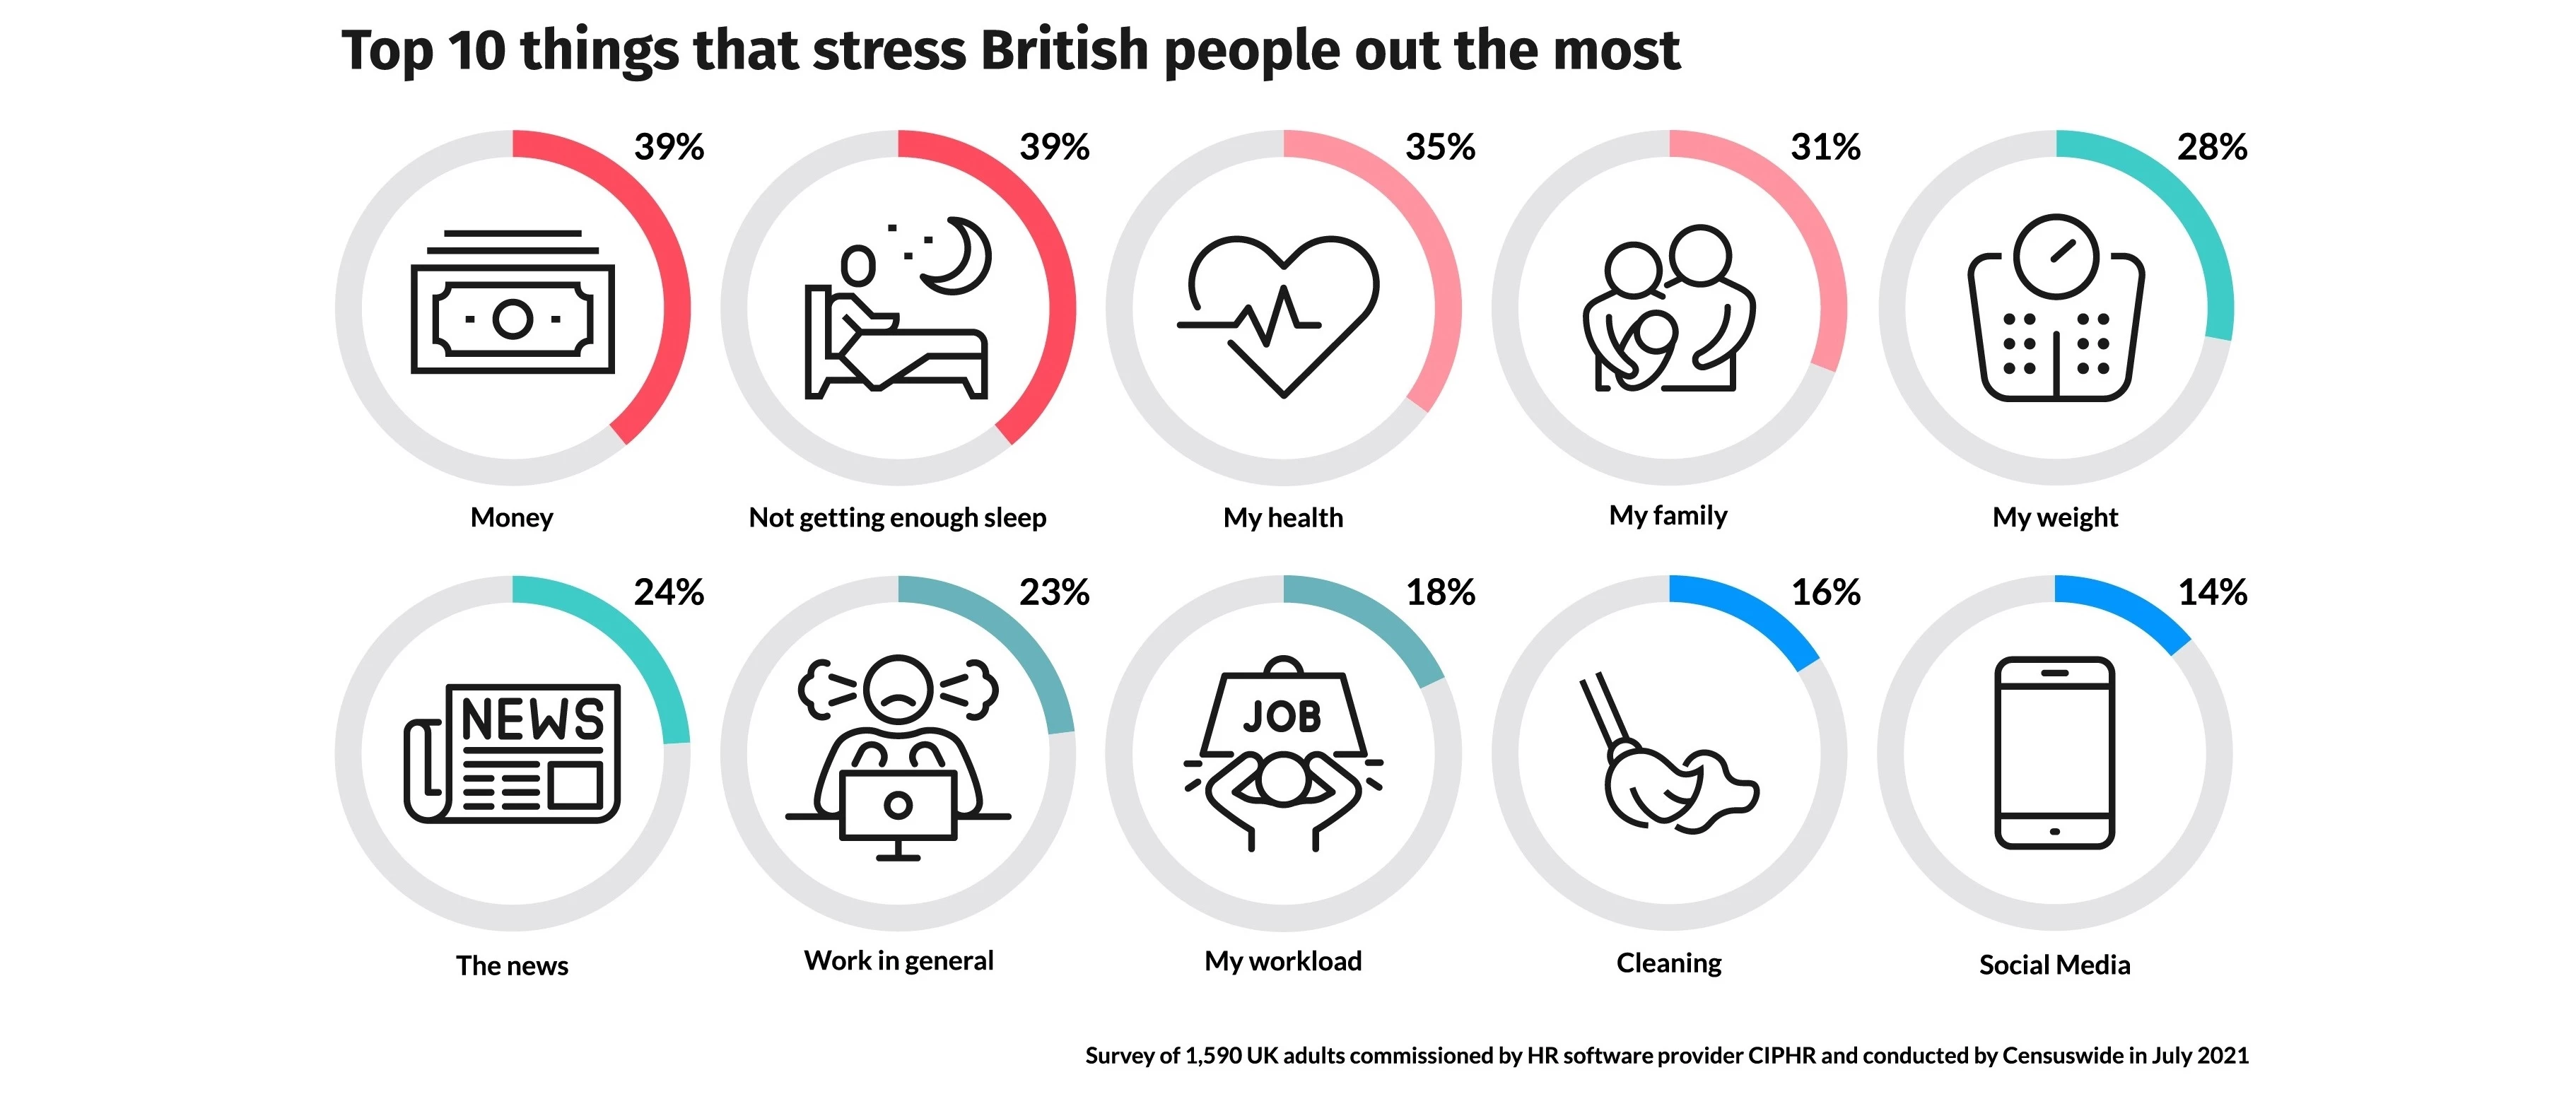 Infographic: Top 10 causes of stress for British adults in 2021